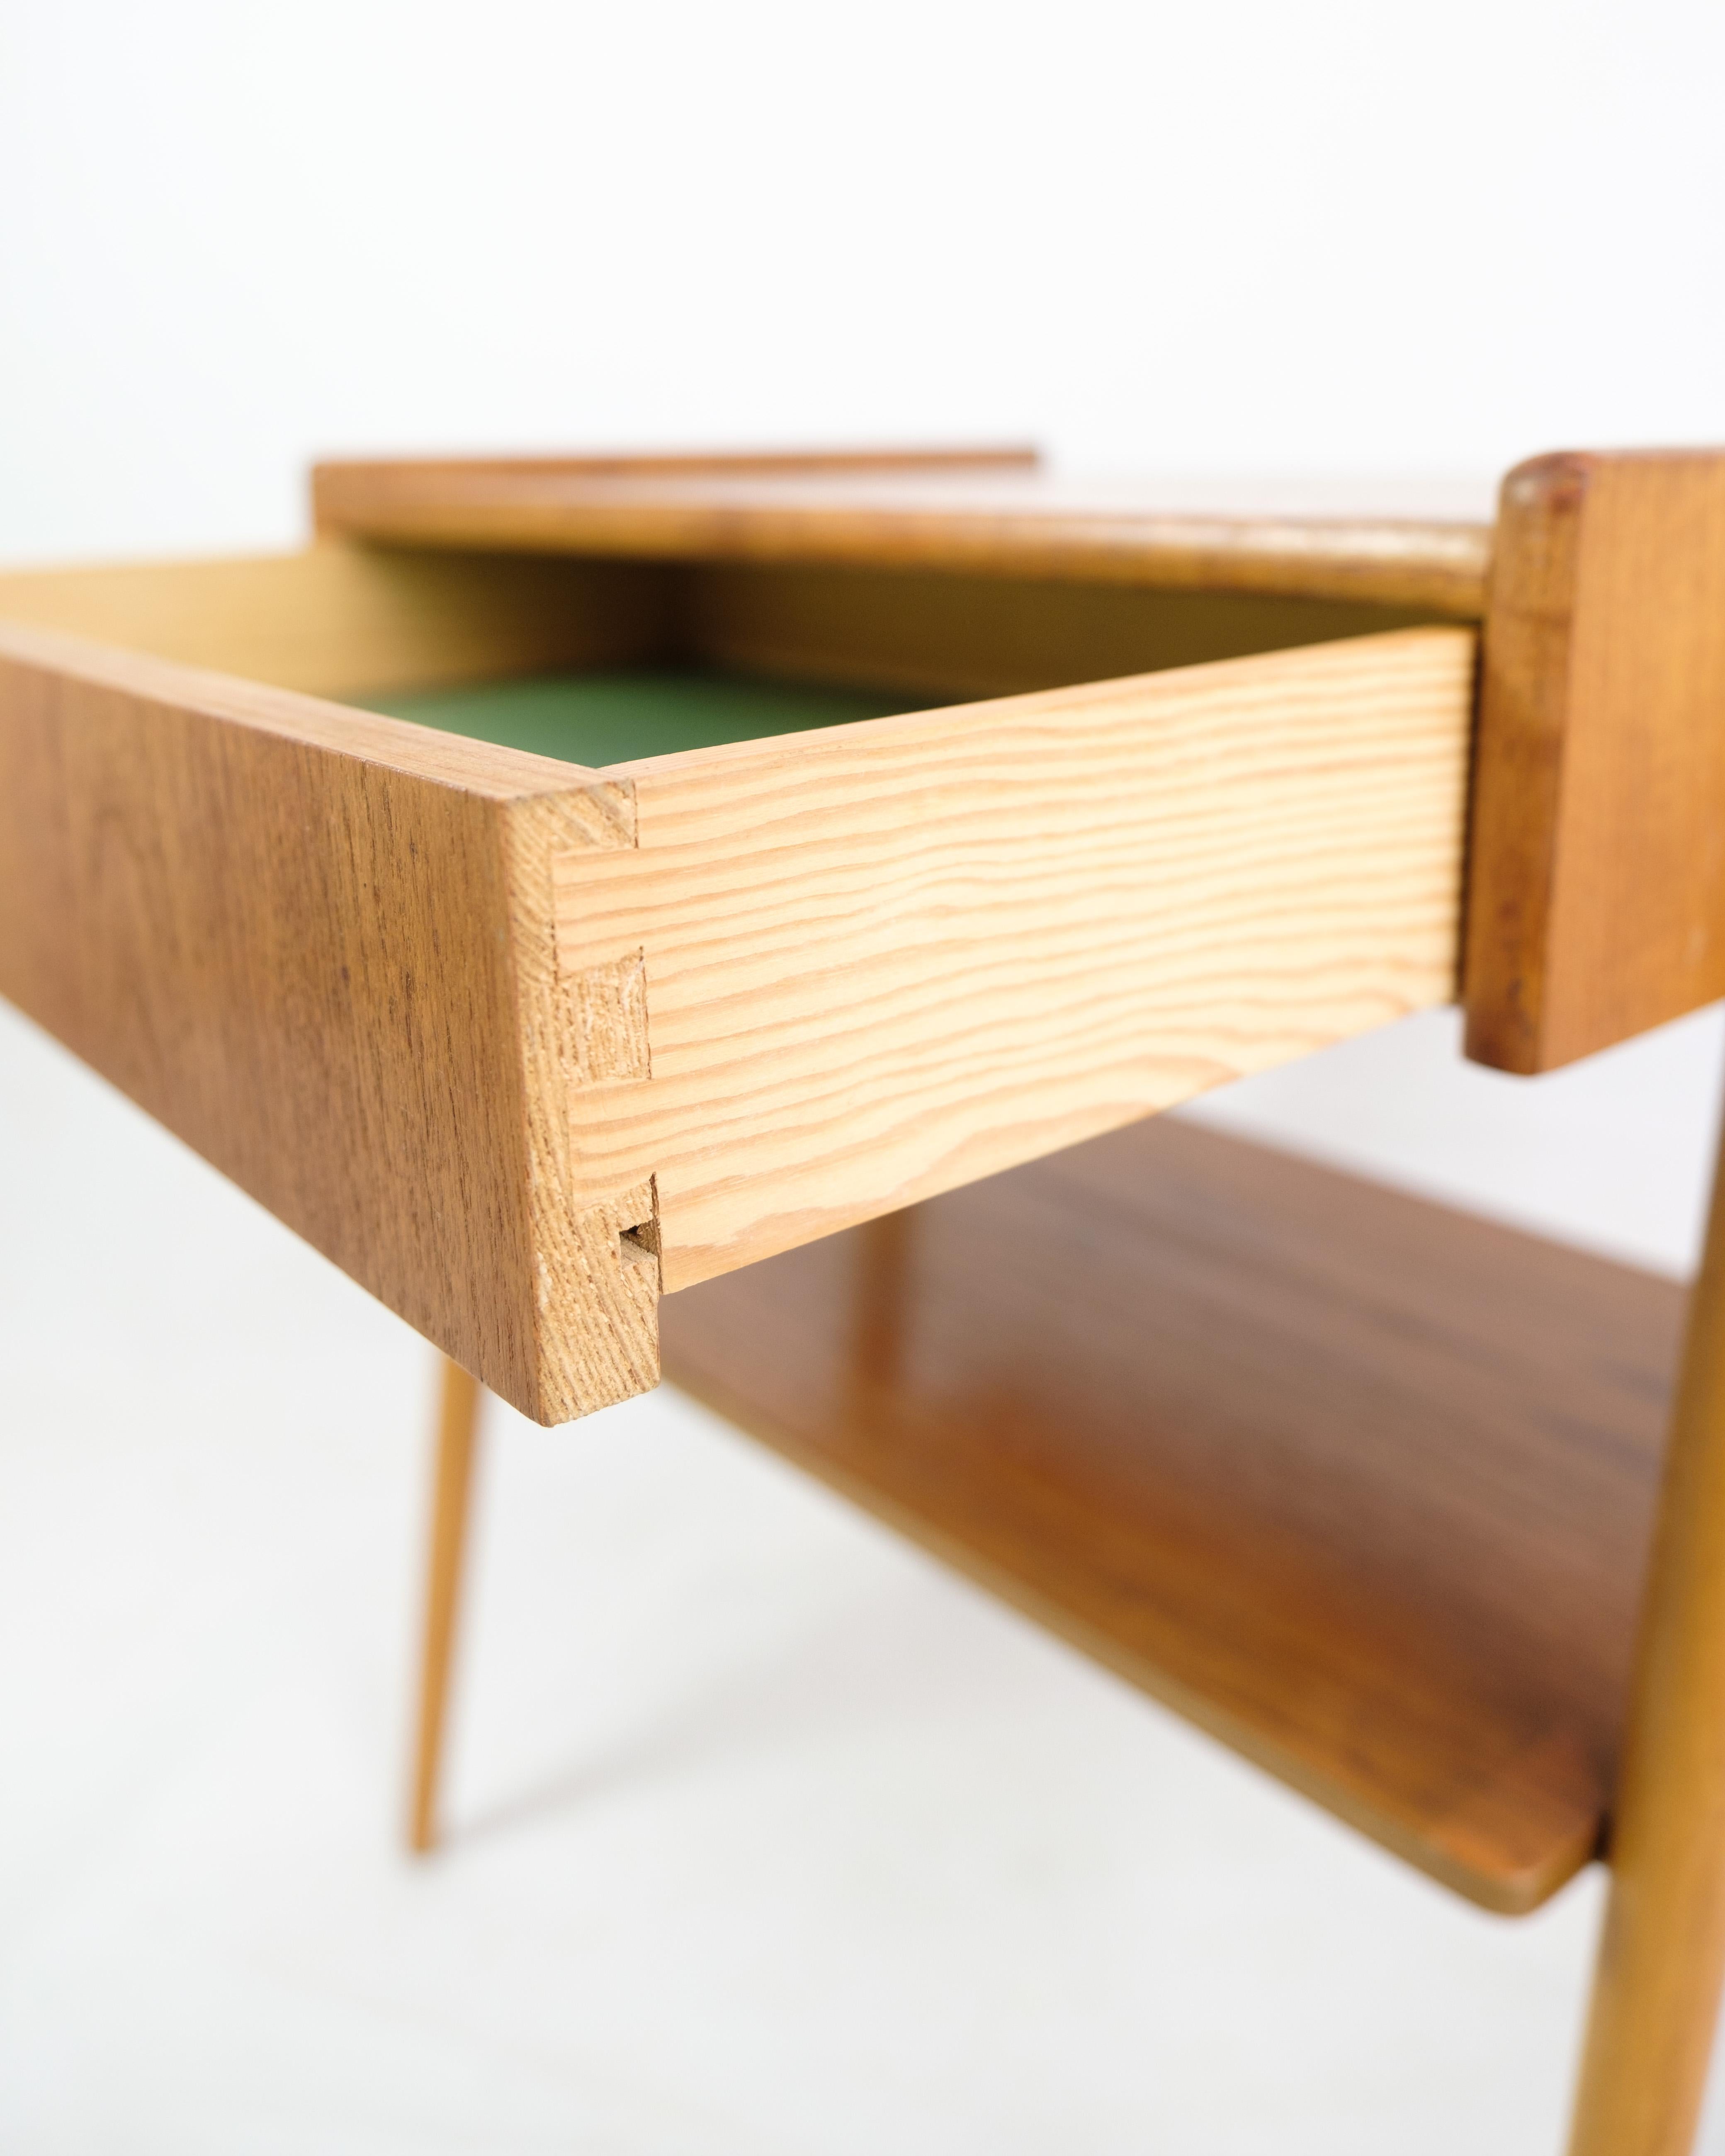 Set of Nightstands In Teak, By AB Carlström & Co Furniture Factory From 1950s For Sale 4